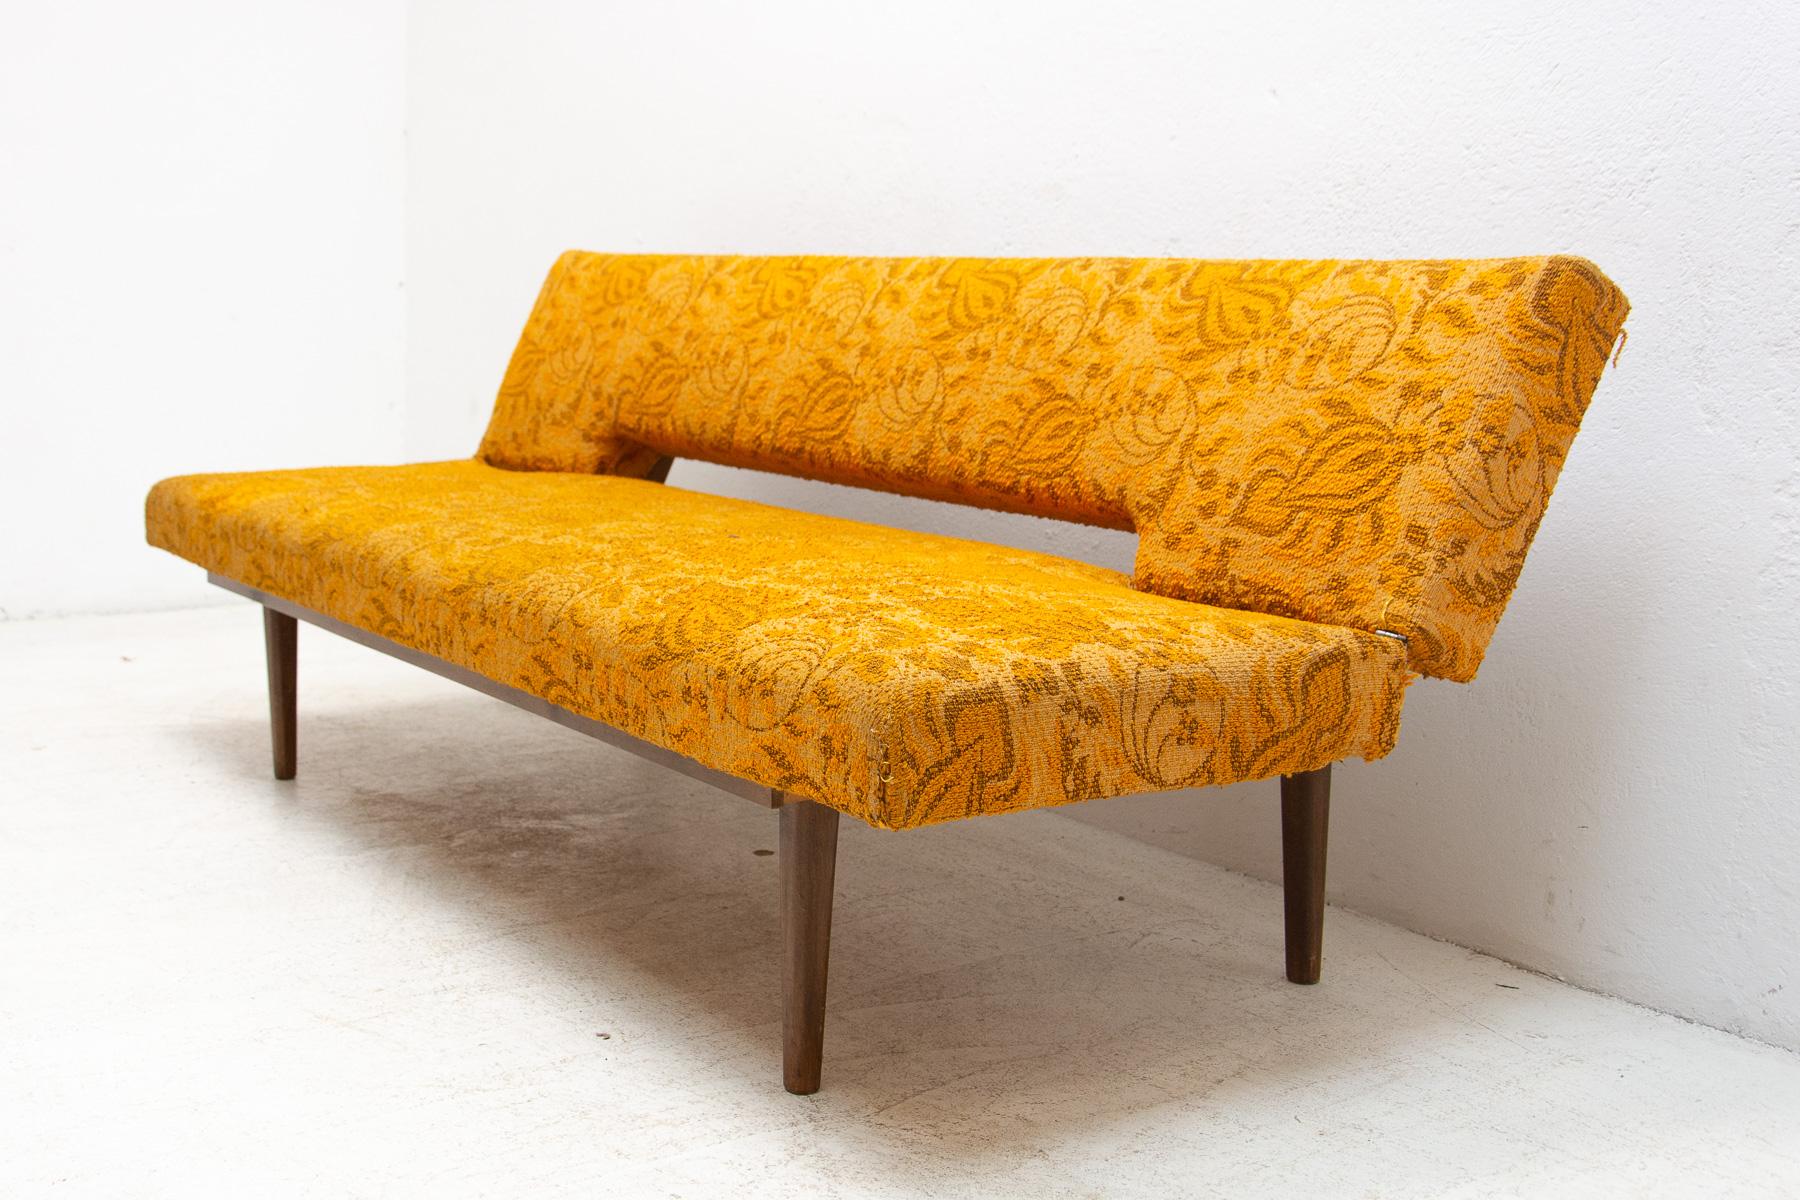 Mid century sofa/daybed, made in the former Czechoslovakia in the 1960´s, designed by Miroslav Navrátil. Material: beech wood, fabric. The sofa is in very good Vintage condition.

Height: 70 cm

Lenght: 182 cm

Depth: 77 cm

Sleeping area: